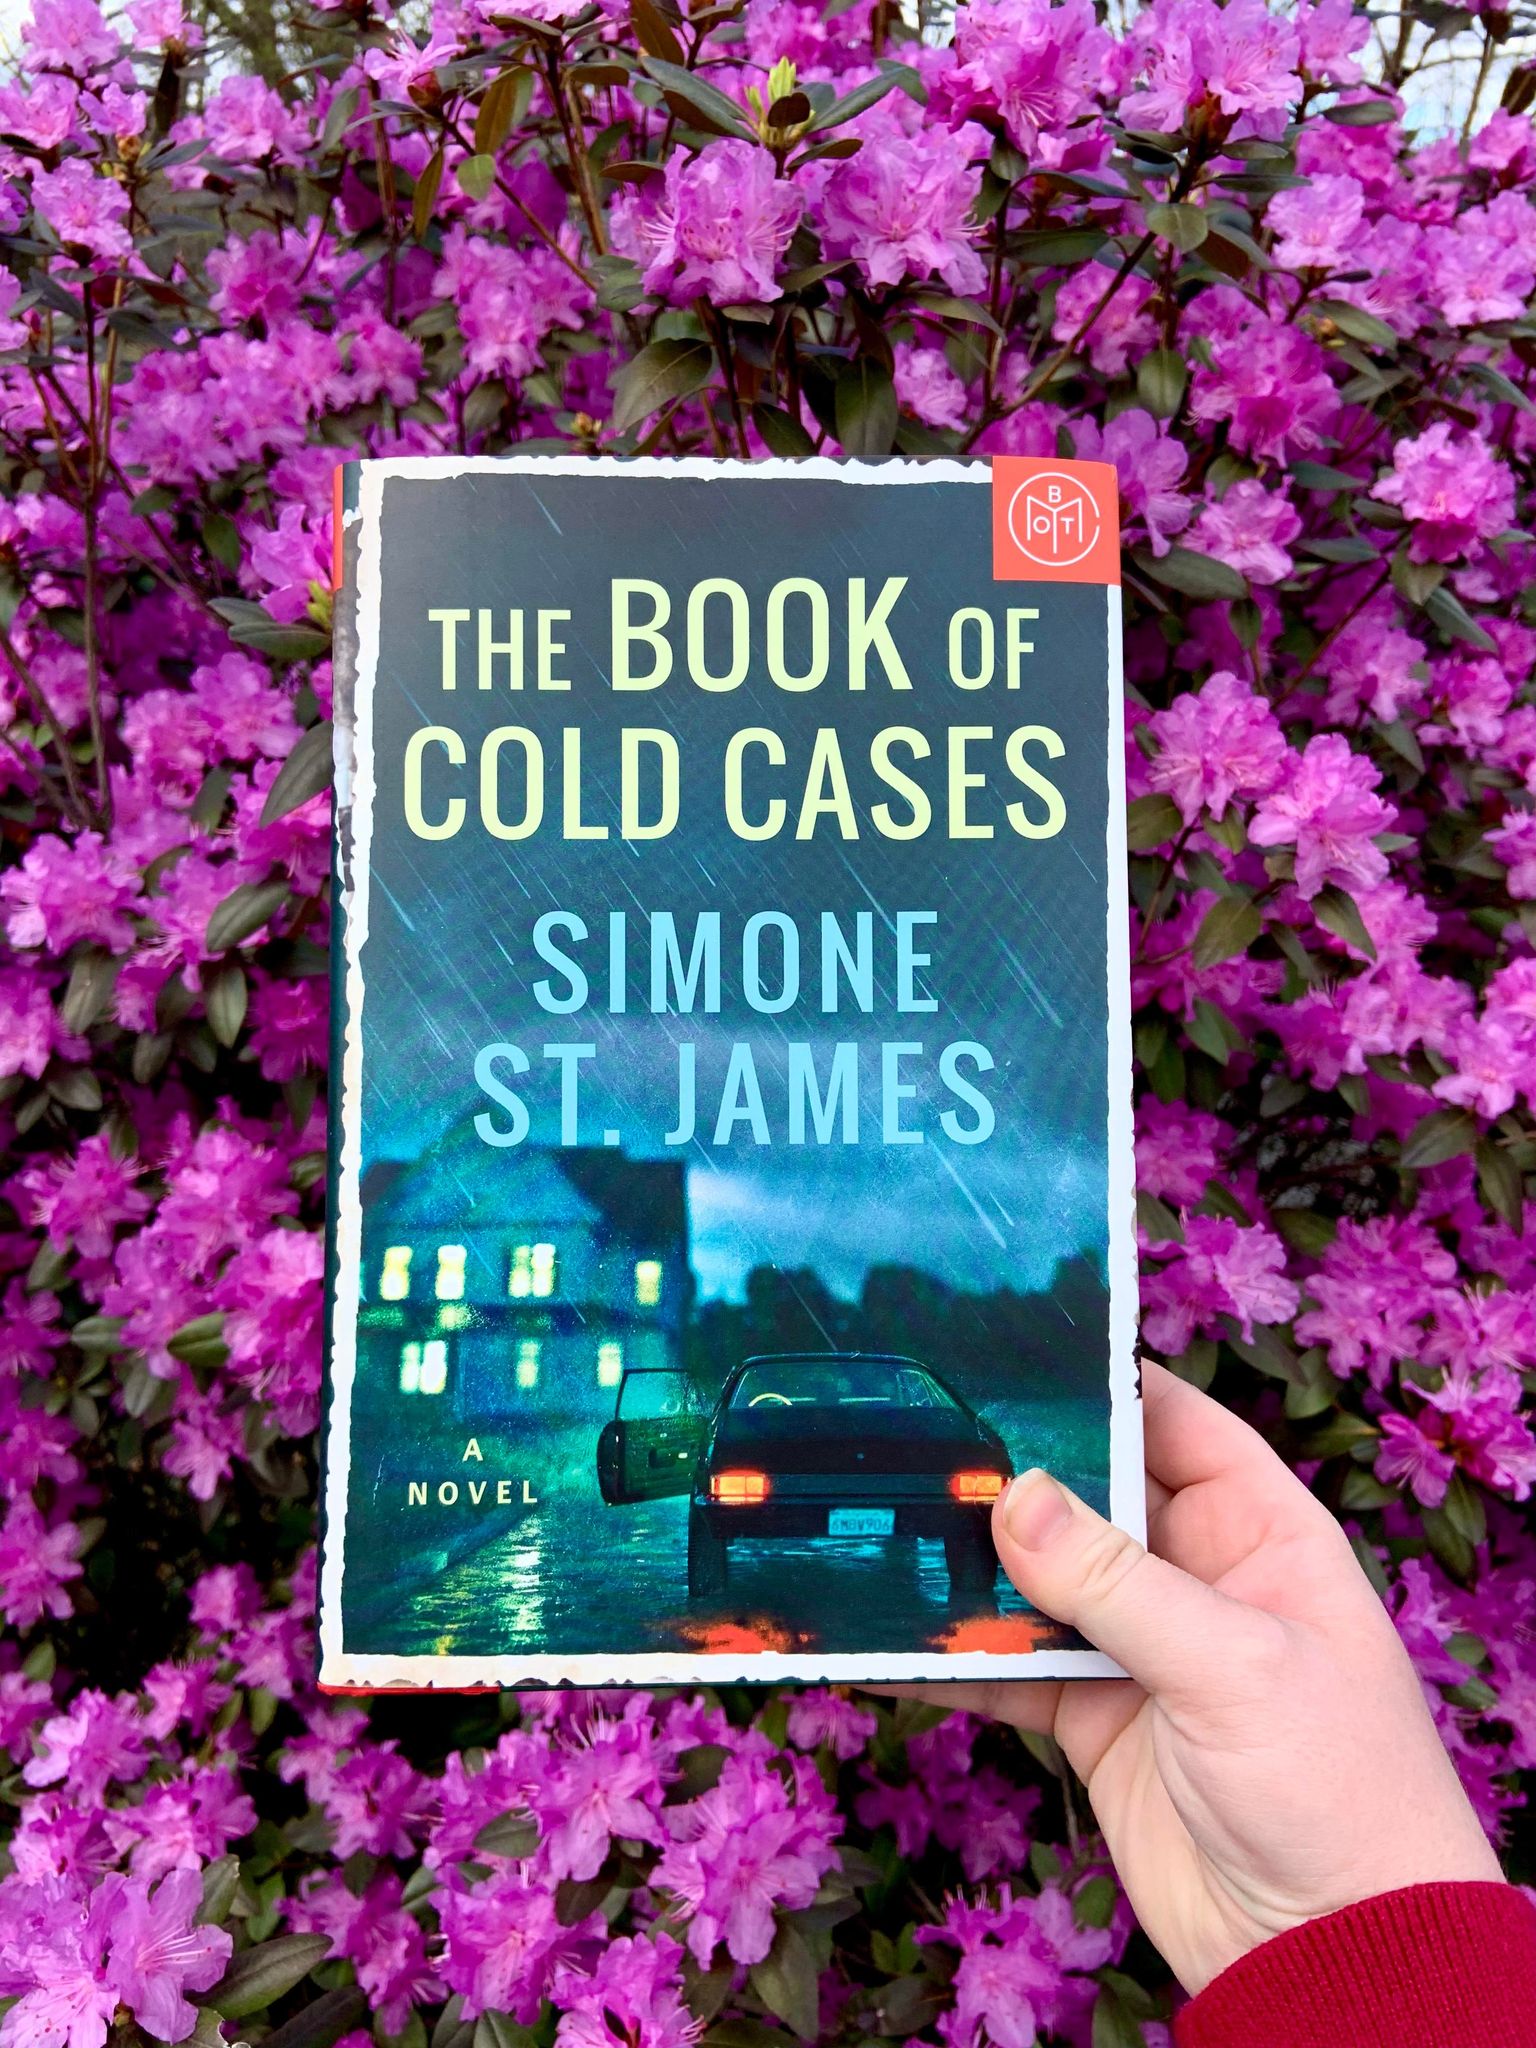 The Book of Cold Cases by Simone St. James–After The Last Page Book Review